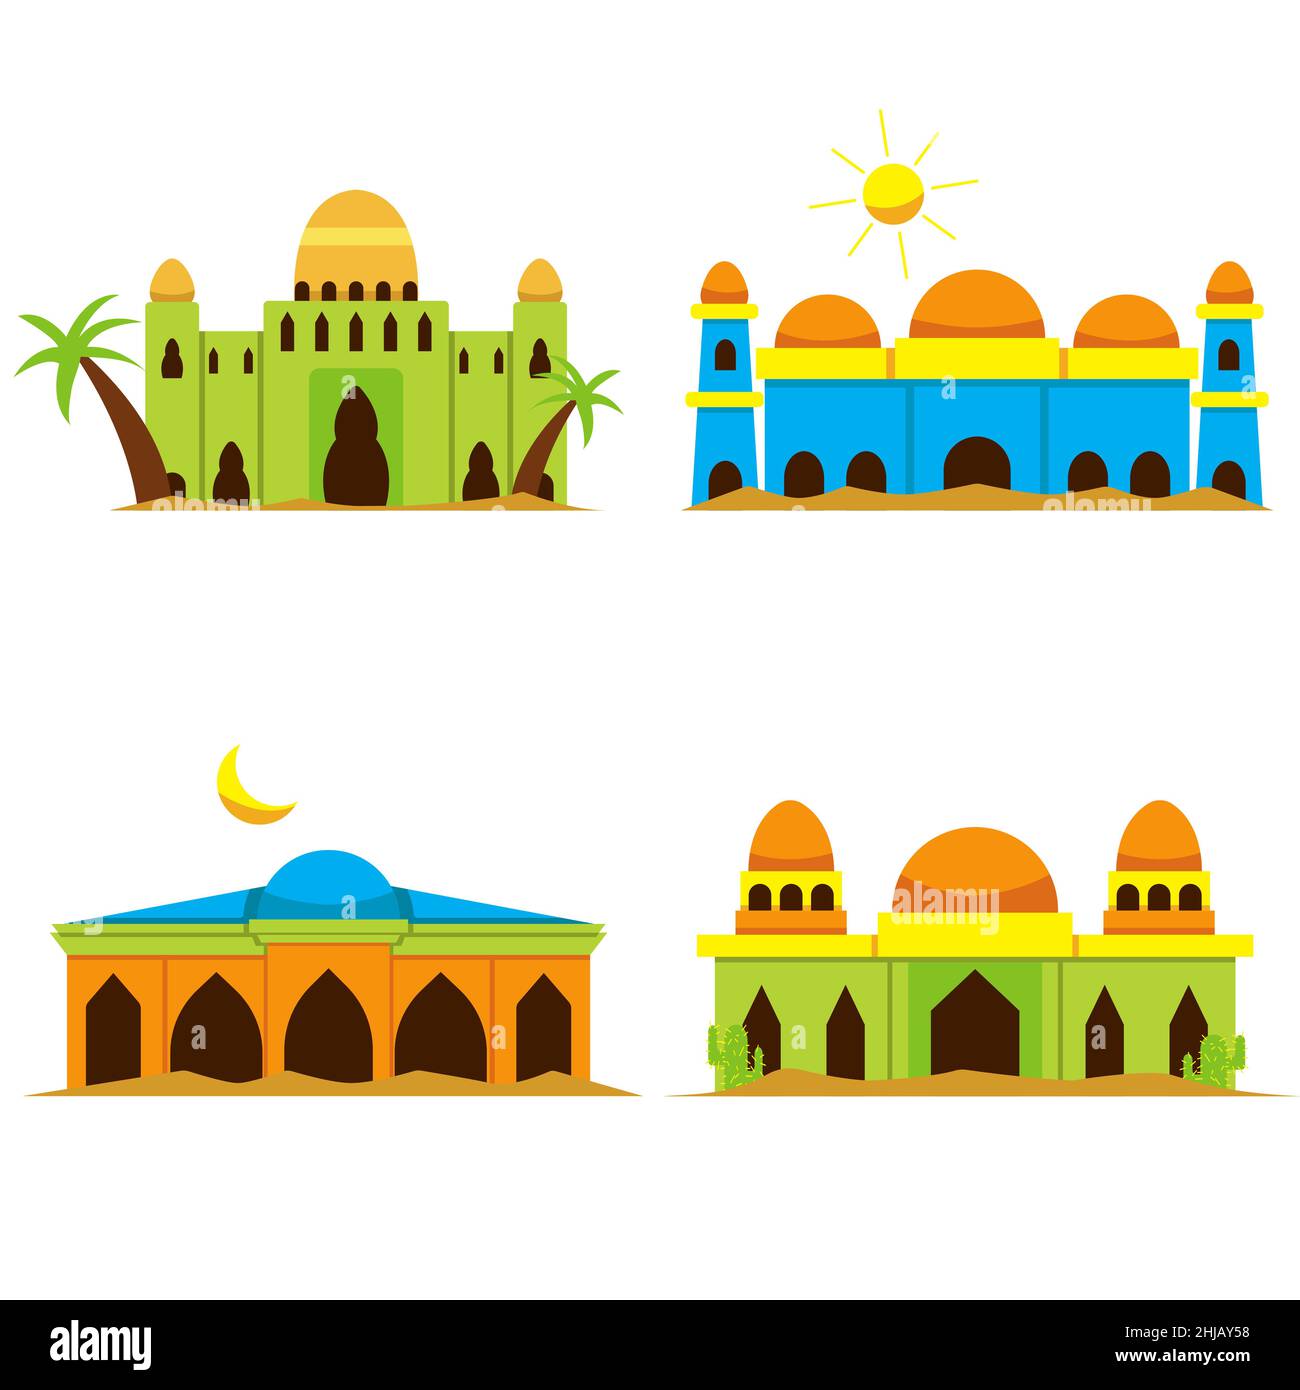 a set of vector illustrations of a mosque in the desert with different shapes and colors Stock Vector